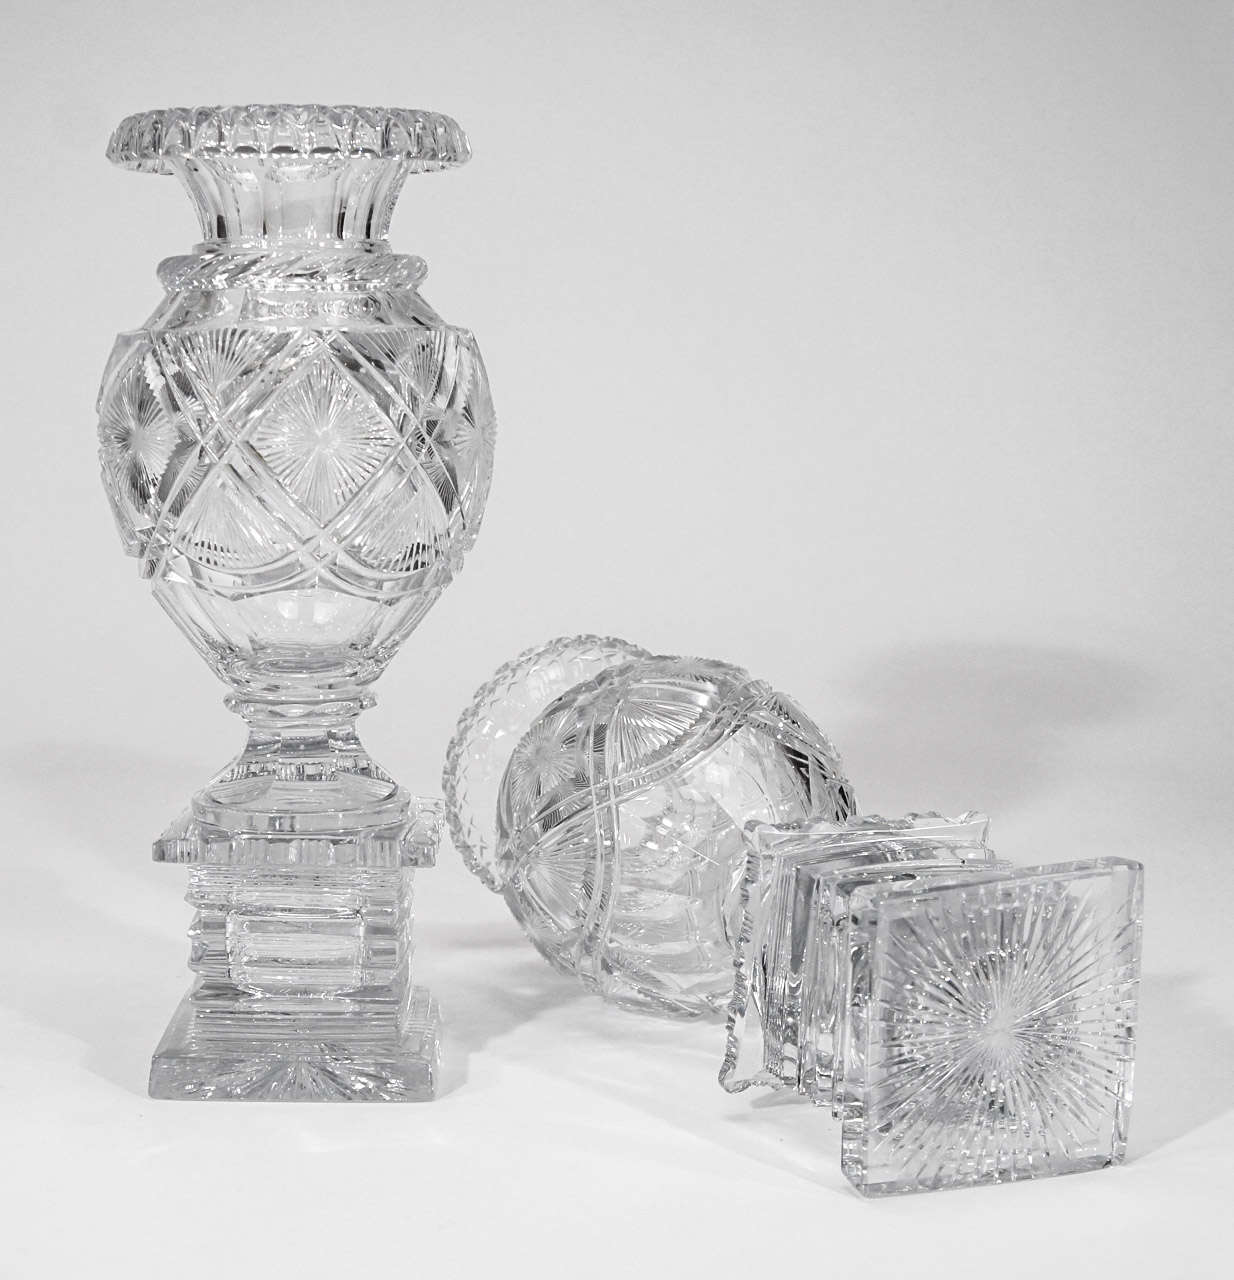 Pair of 19th C. Anglo-Irish Cut Crystal Mantle Vases W/ Square Bases For Sale 3